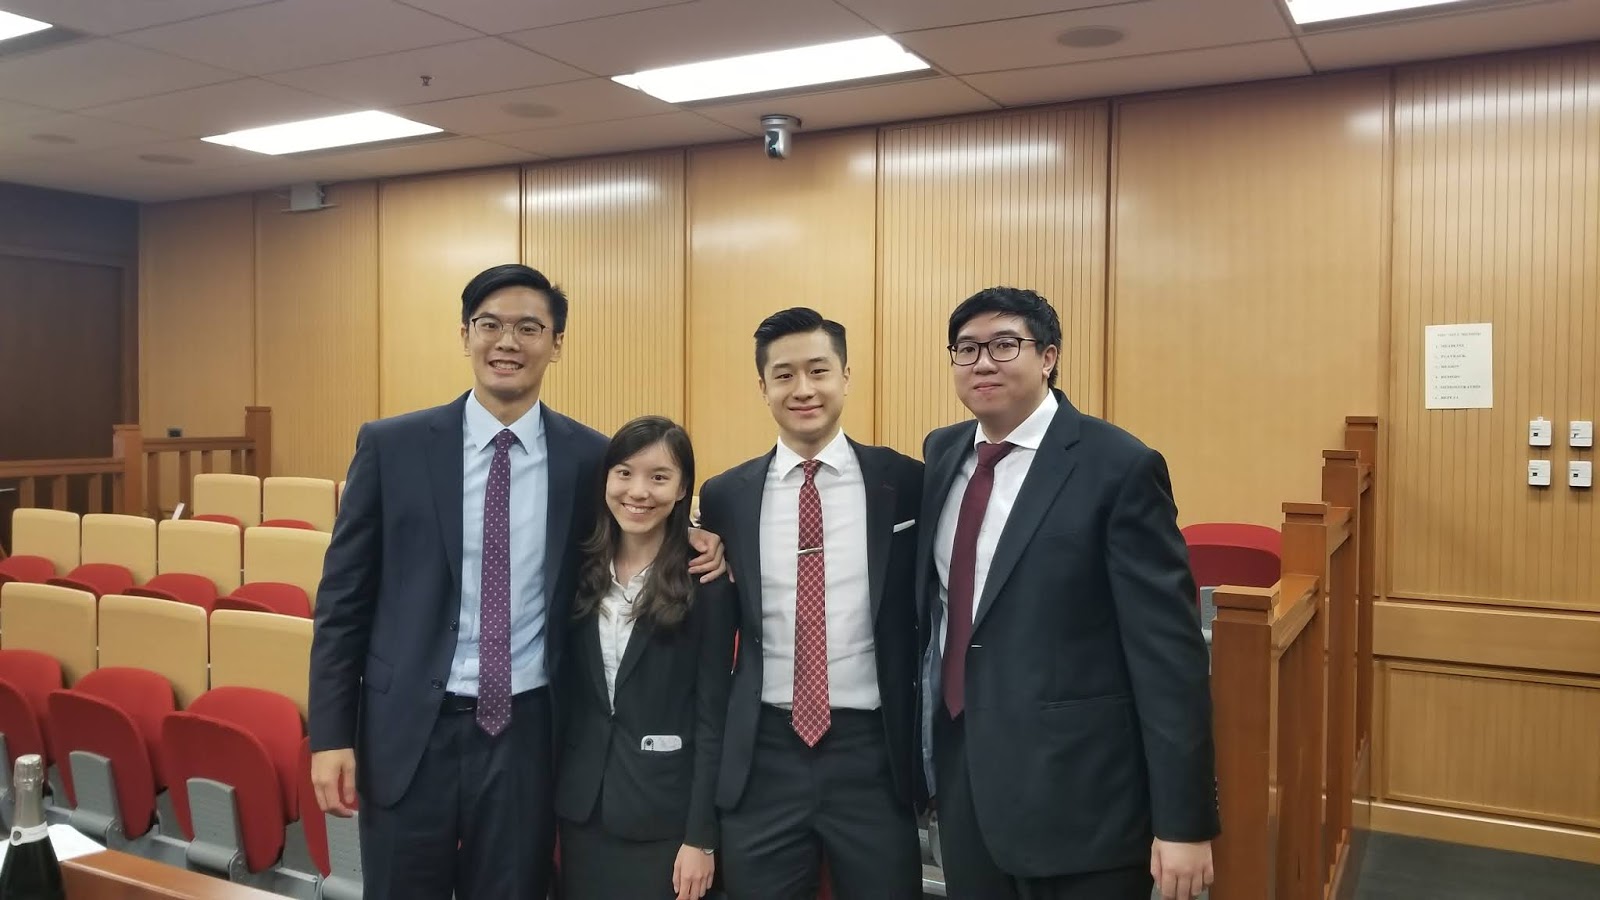 hku-legal-scholarship-blog-hku-celebrates-another-victory-in-the-hsf-competition-law-moot-2020